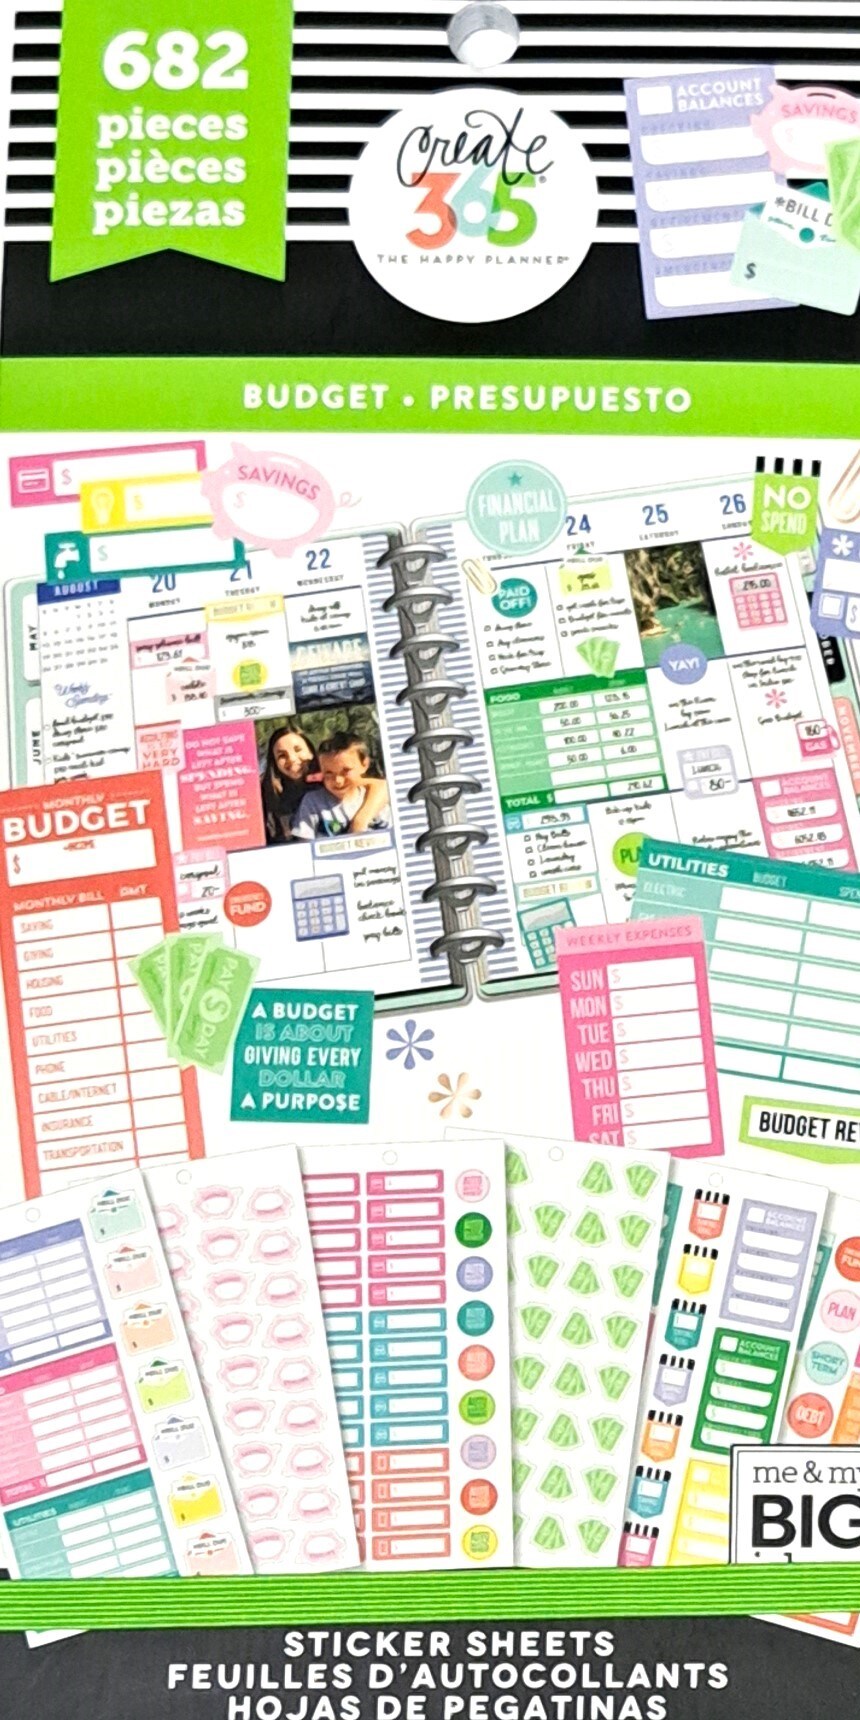 The Happy Planner Budget 682 PC Sticker Sheets